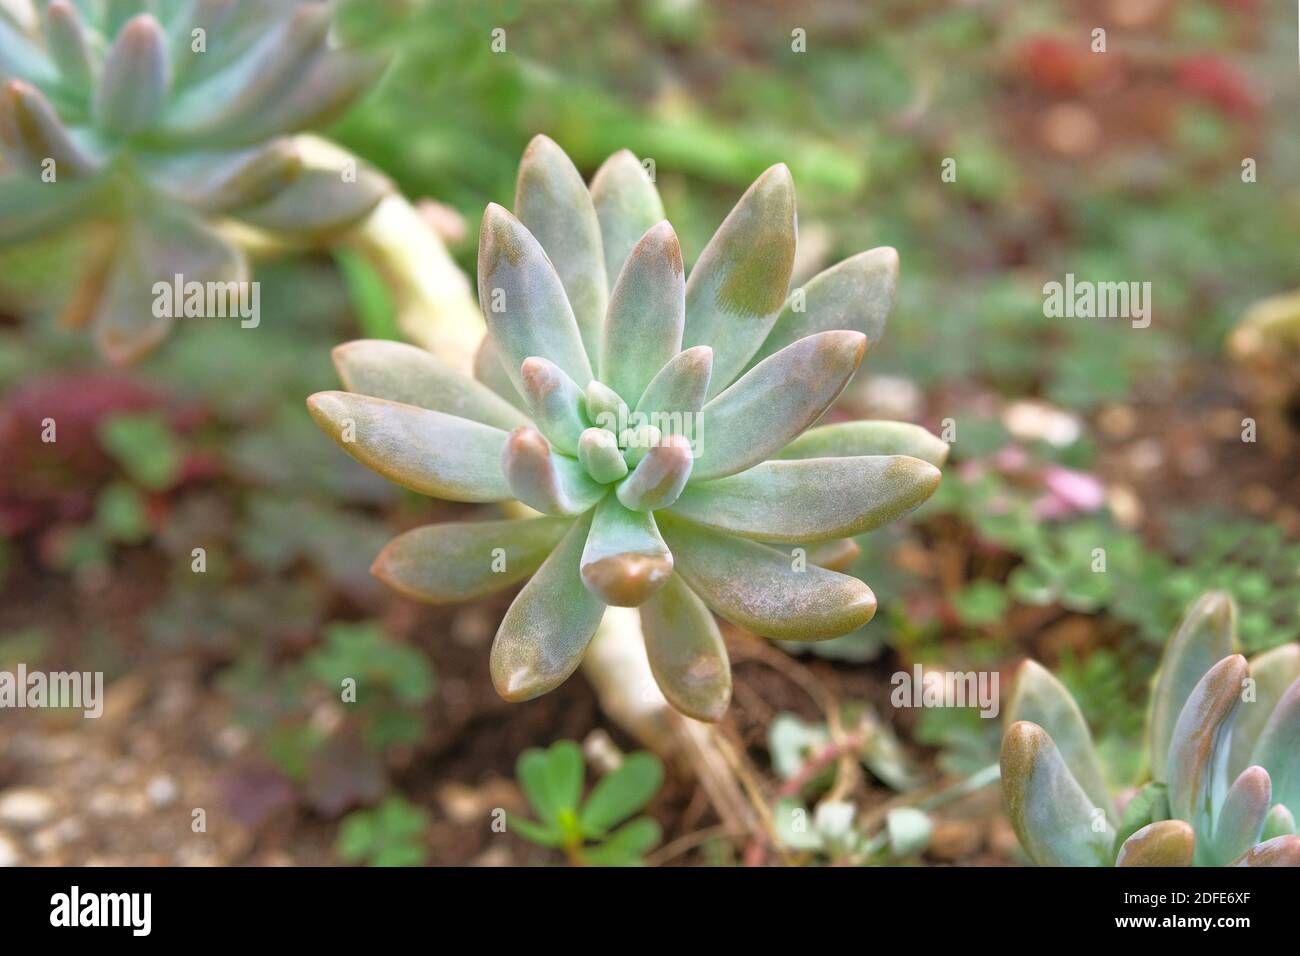 Succulents plants close up in outdoor. Landscape design. Plant with green succulent leaves adorns Rockery garden. Stock Photo